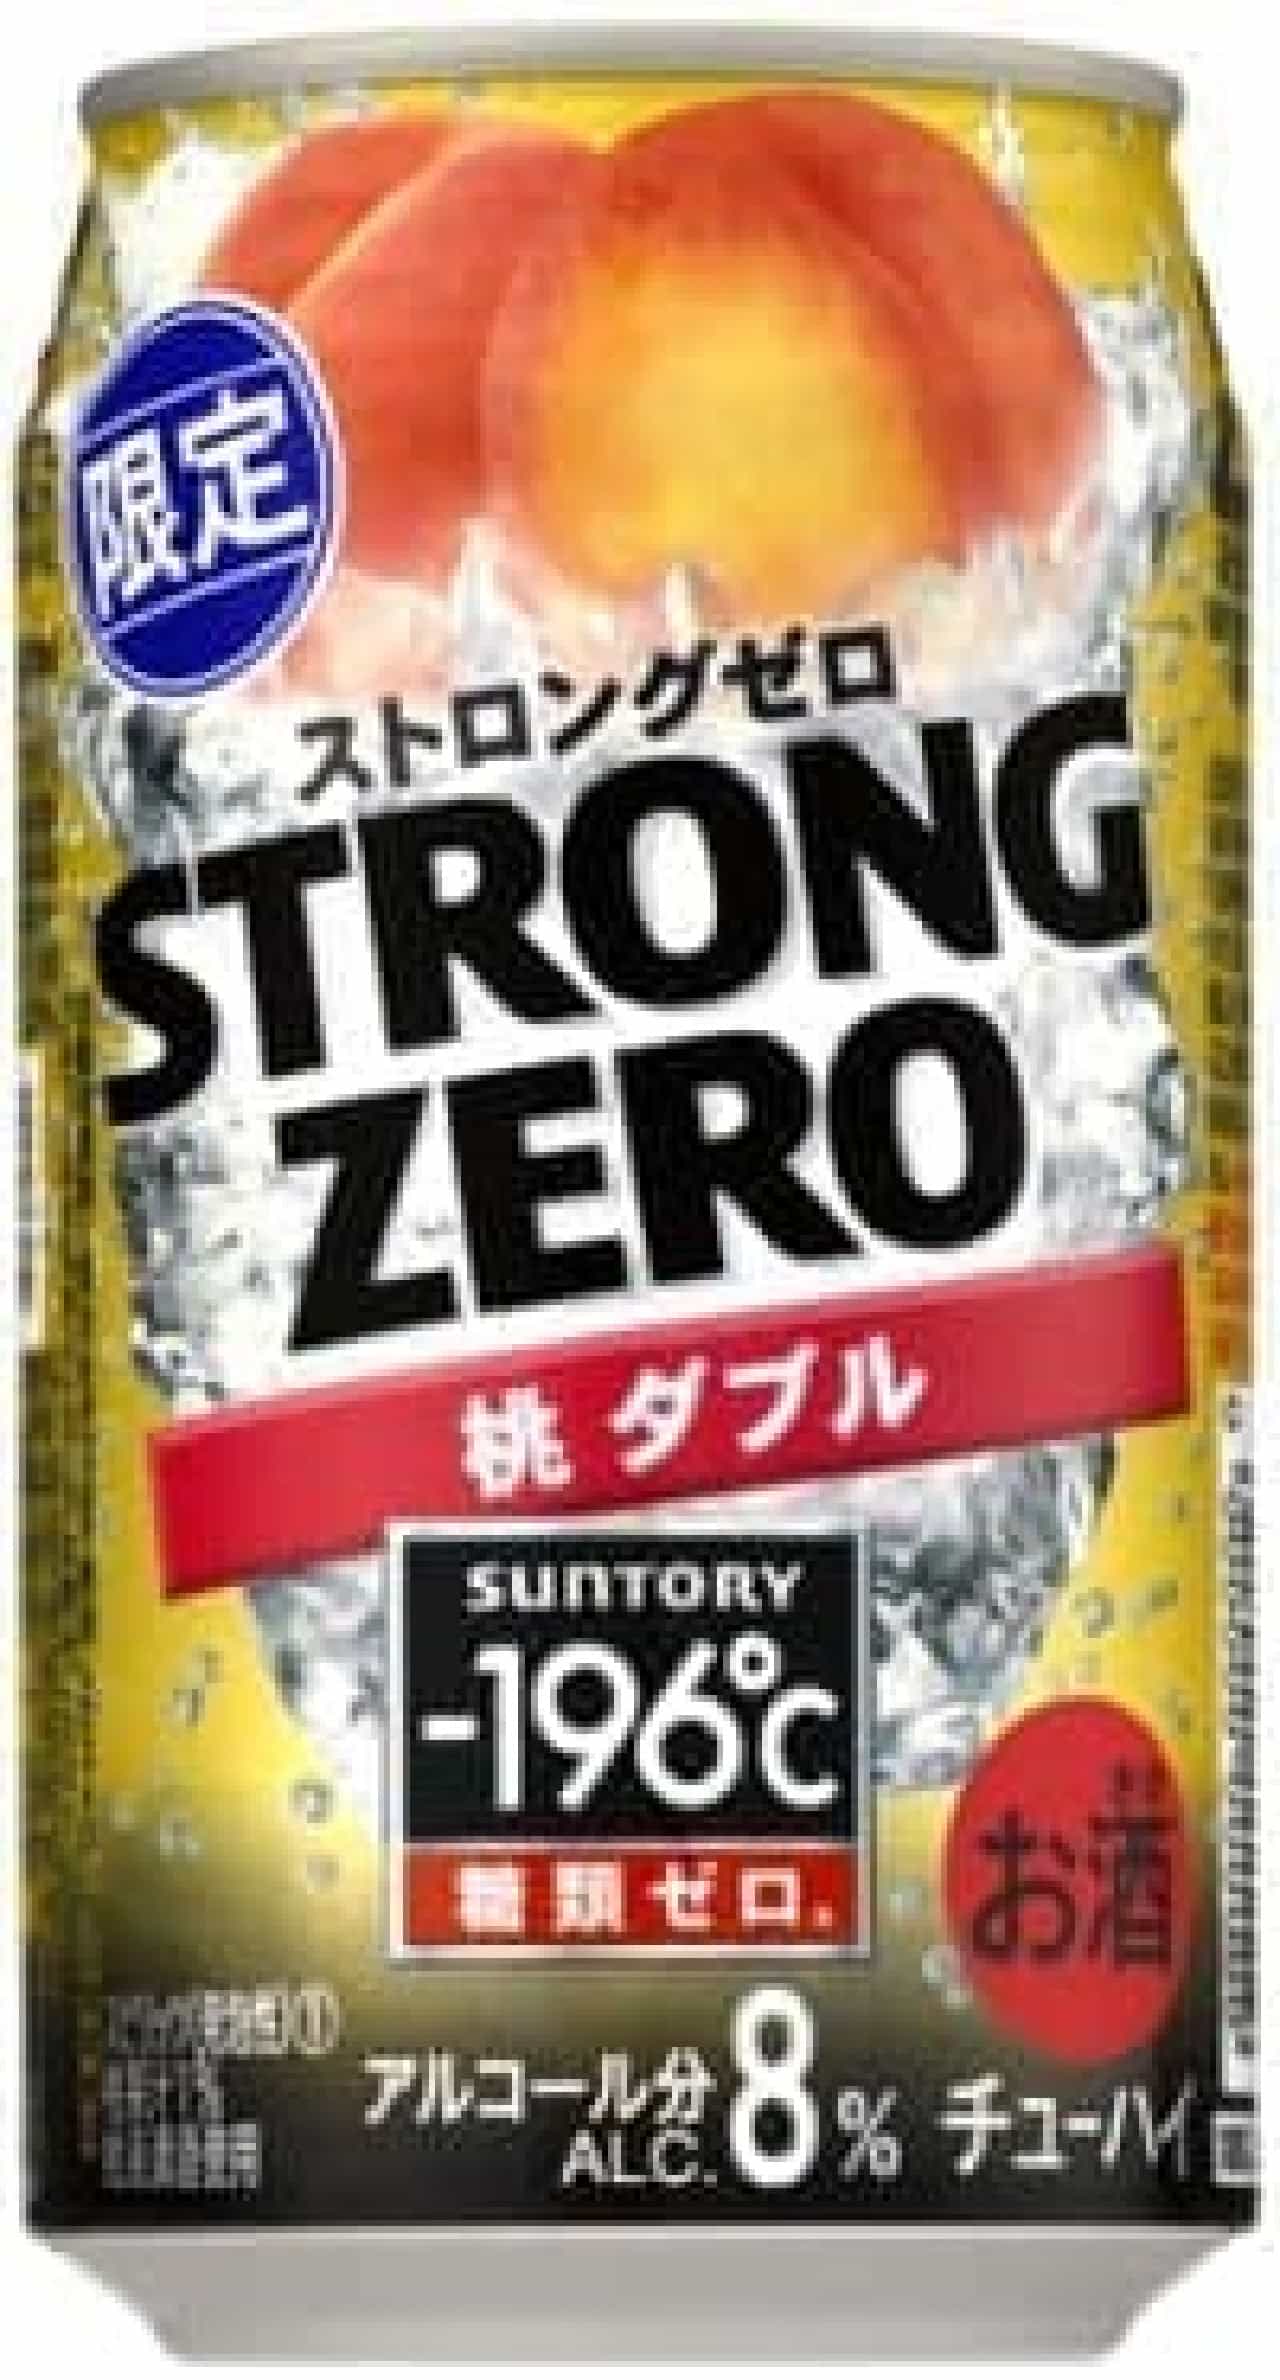 "Strong Zero" which is very active even at home